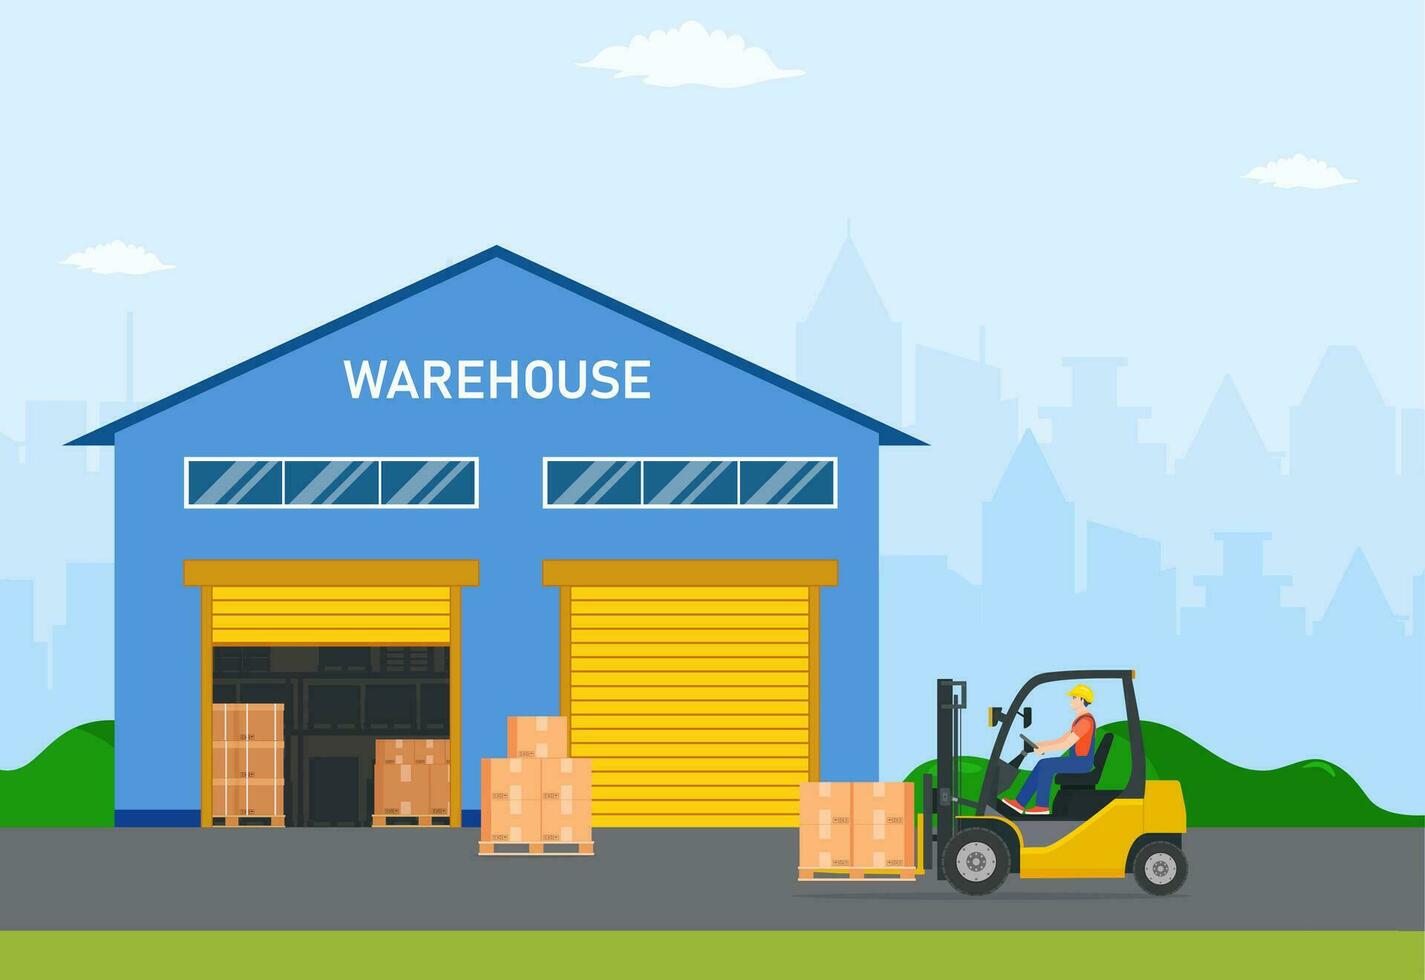 Warehouse industry with storage buildings, forklift and rack with boxes. The loader carries goods to the warehouse. Distribution logistic and cargo delivery concept. Vector illustration in flat style